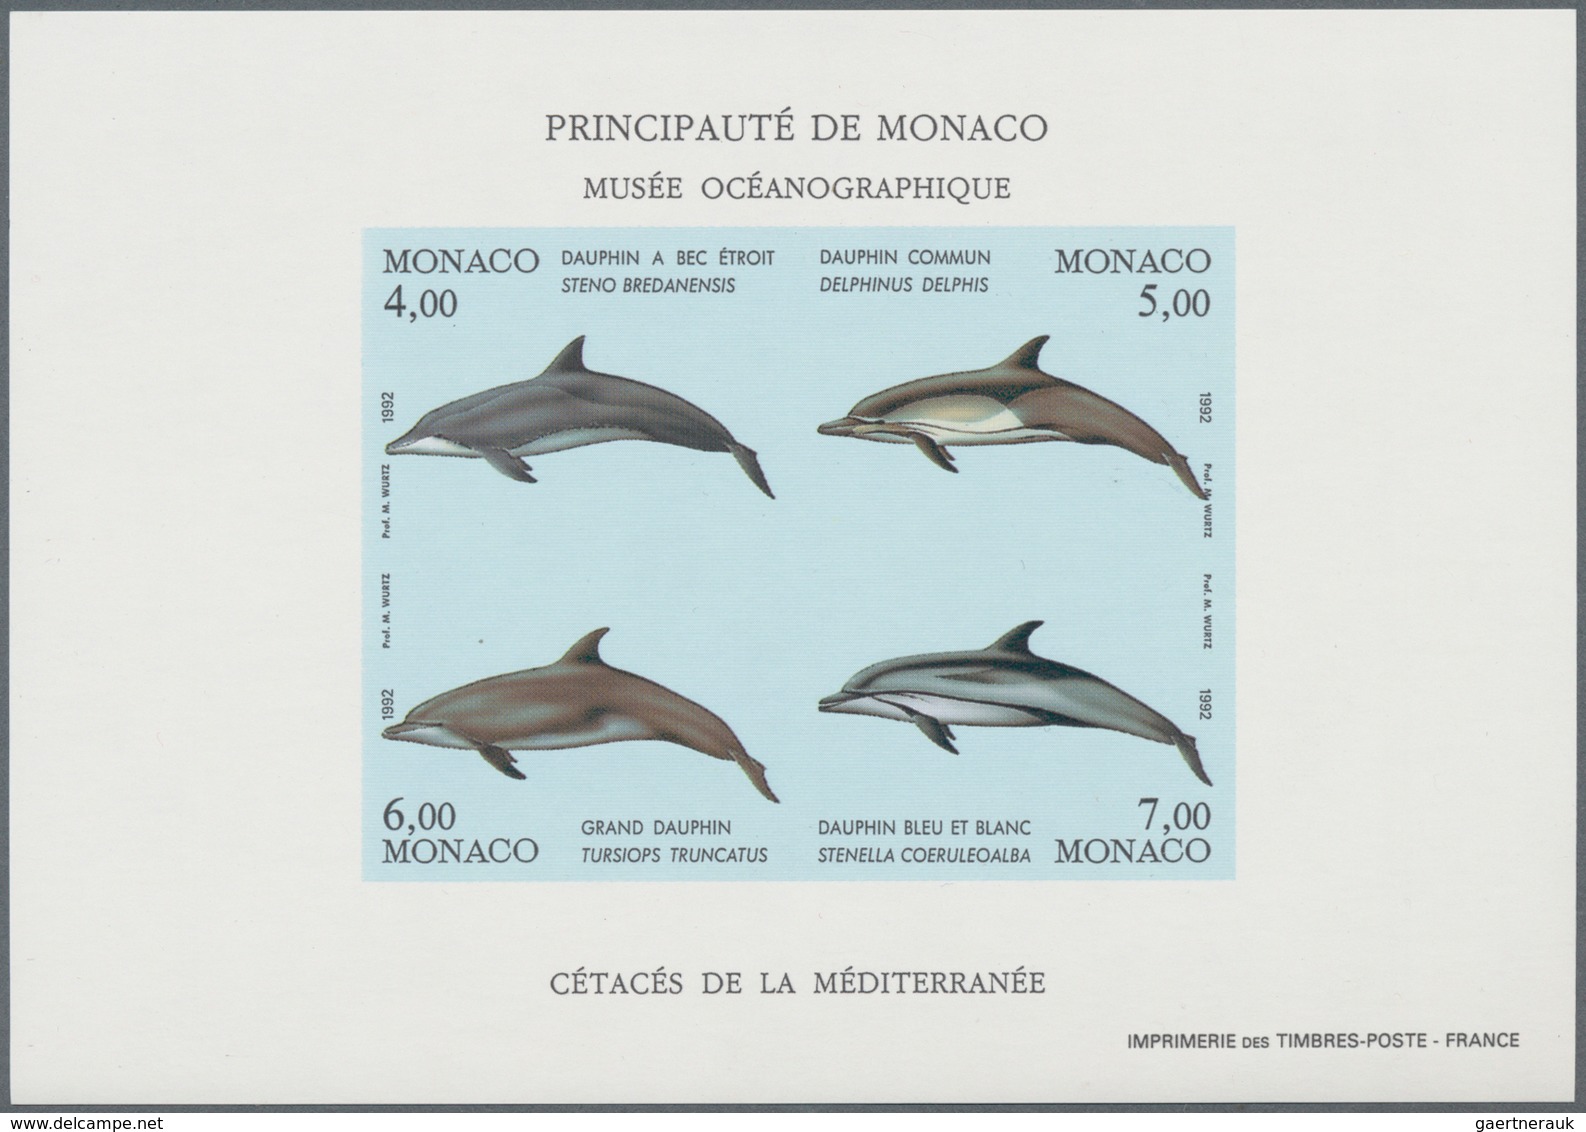 Monaco: 1938/1994, accumulation with 453 MINIATURE SHEETS incl. a nice part IMPERFORATE and SPECIAL